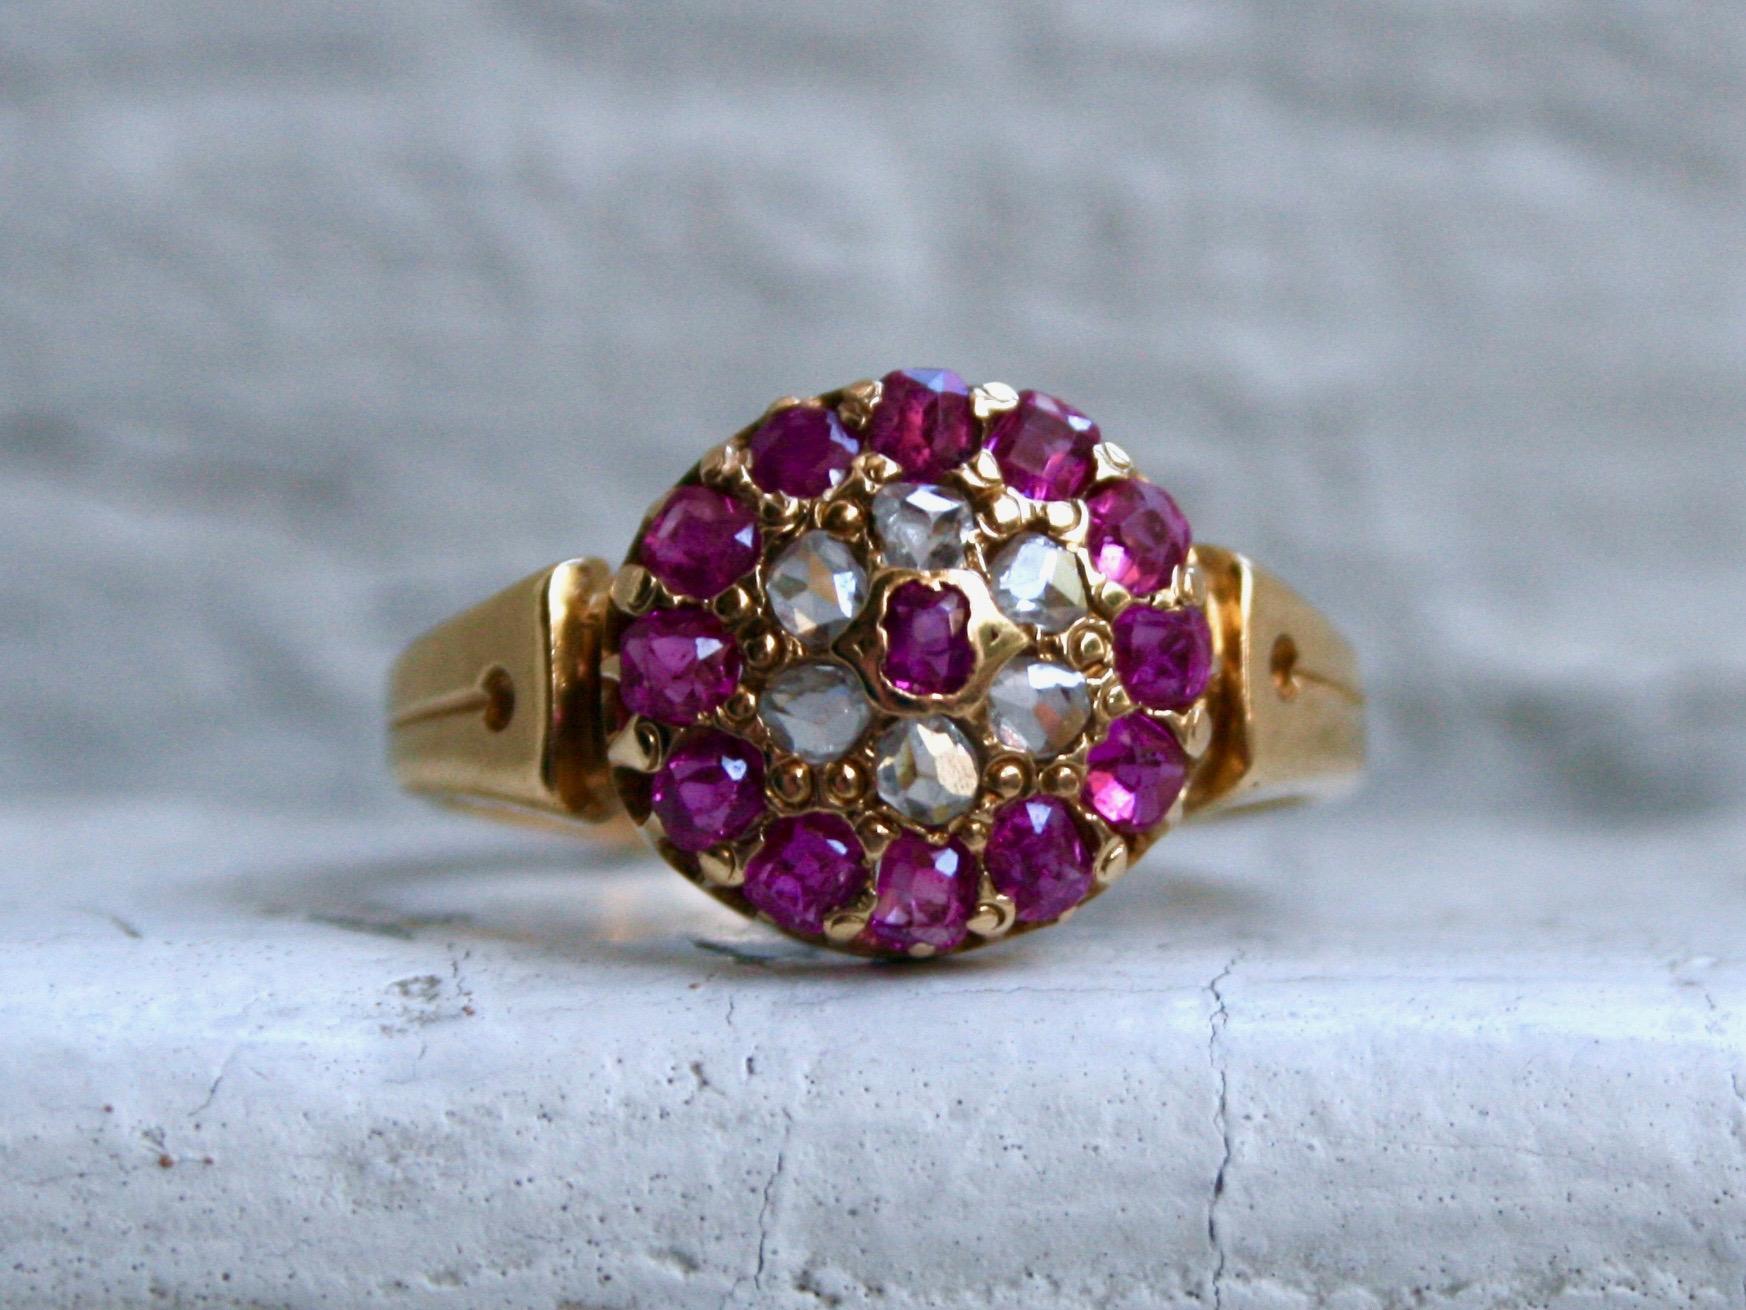 Oh how I love this Stunning Antique Victorian Diamond and Ruby Cluster Engagement Ring! It really has all my favorite things - antique diamonds, ruby, and very very old! Crafted in 14K Yellow Gold in the late 1800's, the design is a classic cluster,